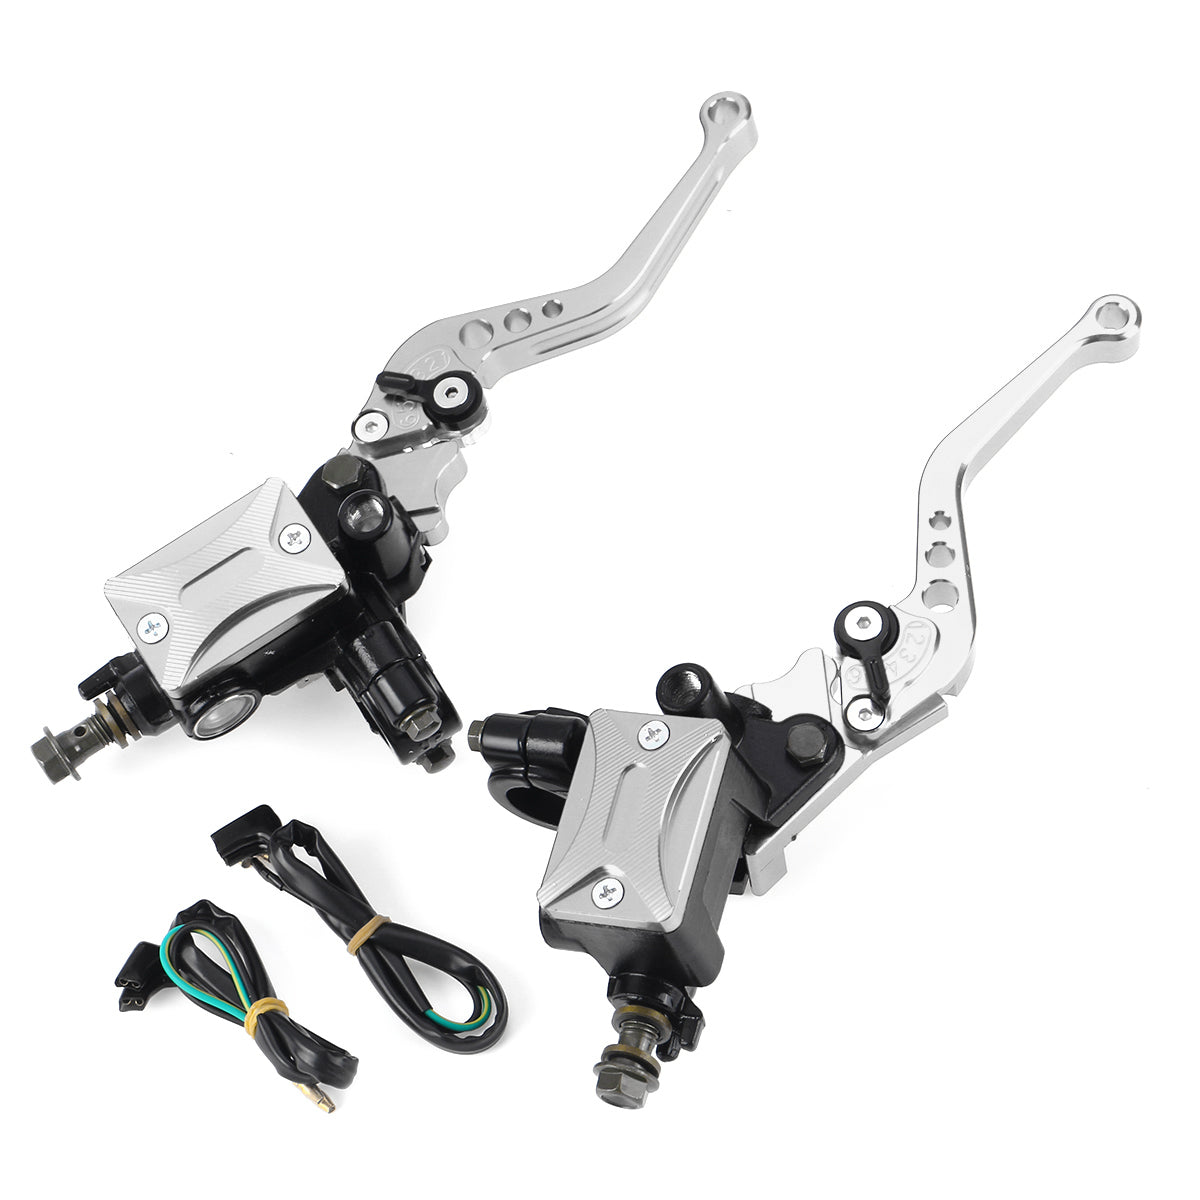 Gray 7/8 Inch 22mm Motorcycle Hydraulic Brake Clutch Master Cylinder Reservoir Lever With Cable Aluminum Universal